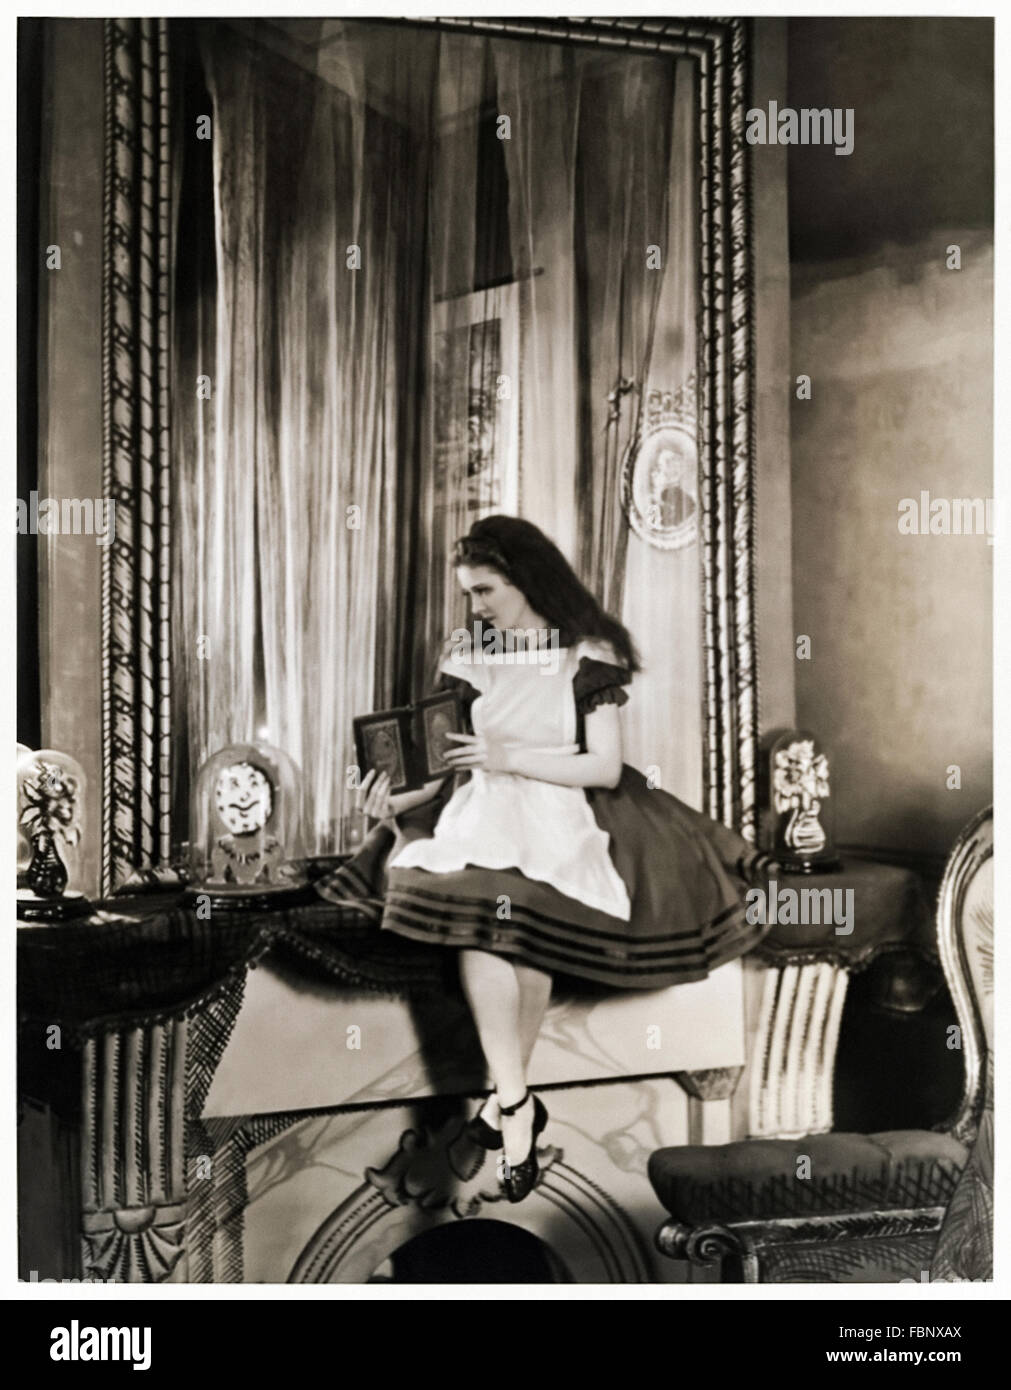 Alice besides the looking glass, publicity photograph for the 1932 stage adaptation of 'Alice in Wonderland' by Lewis Carroll (1832-1898) starring Josephine Hutchinson (1903-1998) as Alice. Stock Photo